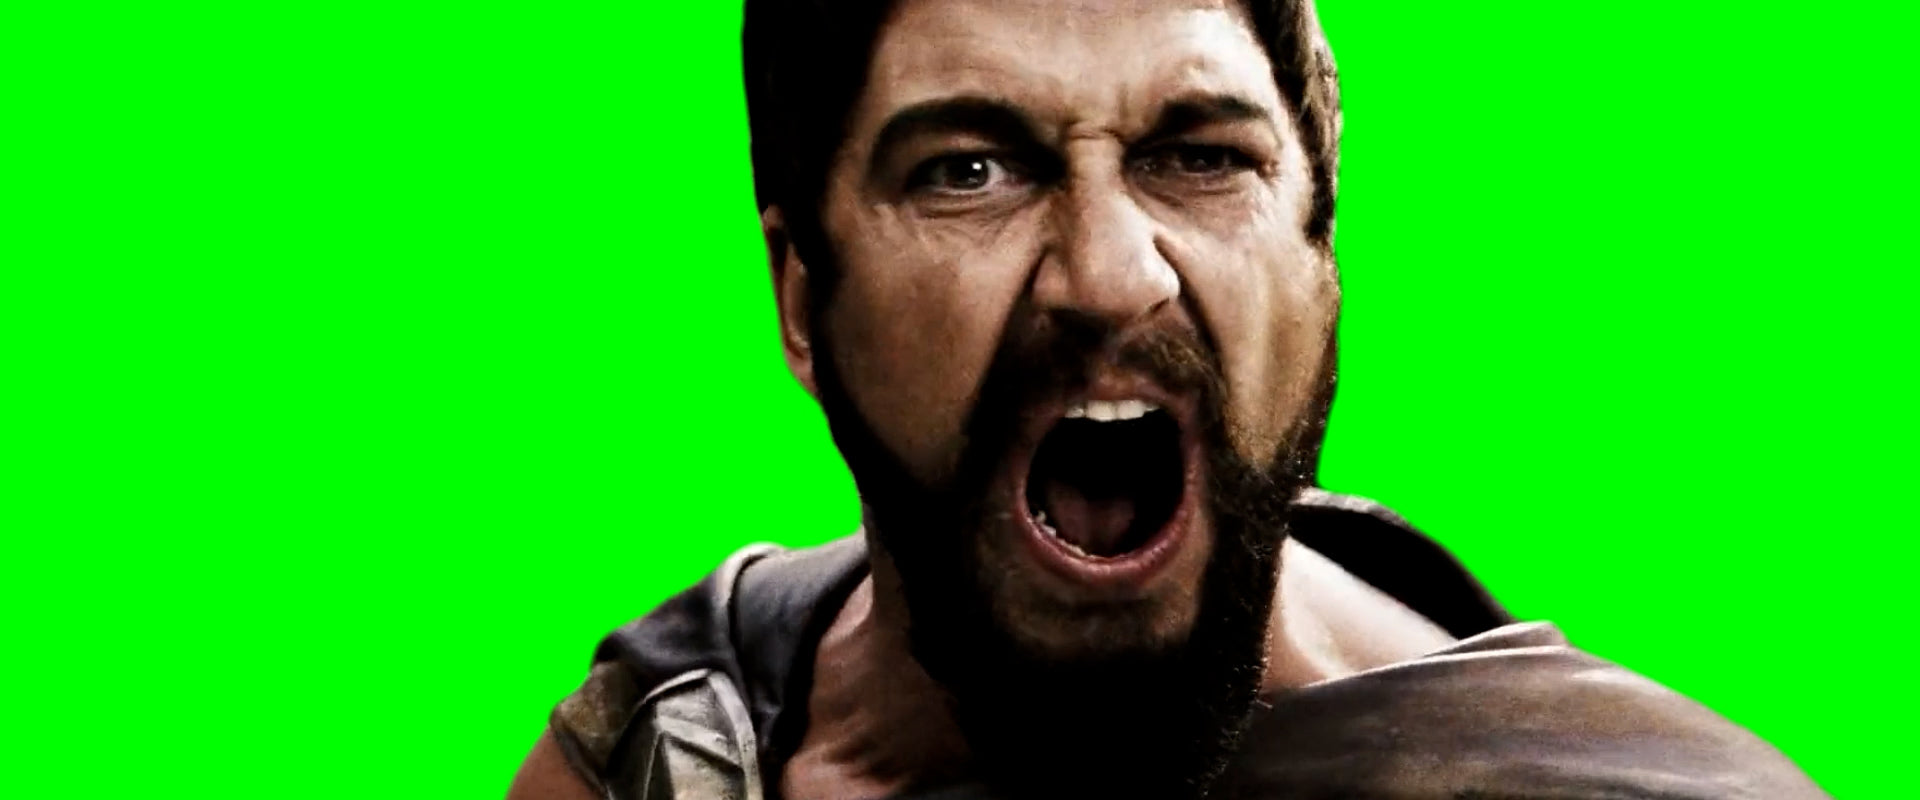 This Is SPARTA by SAMMY & LESEN and Gerard Butler on Beatsource